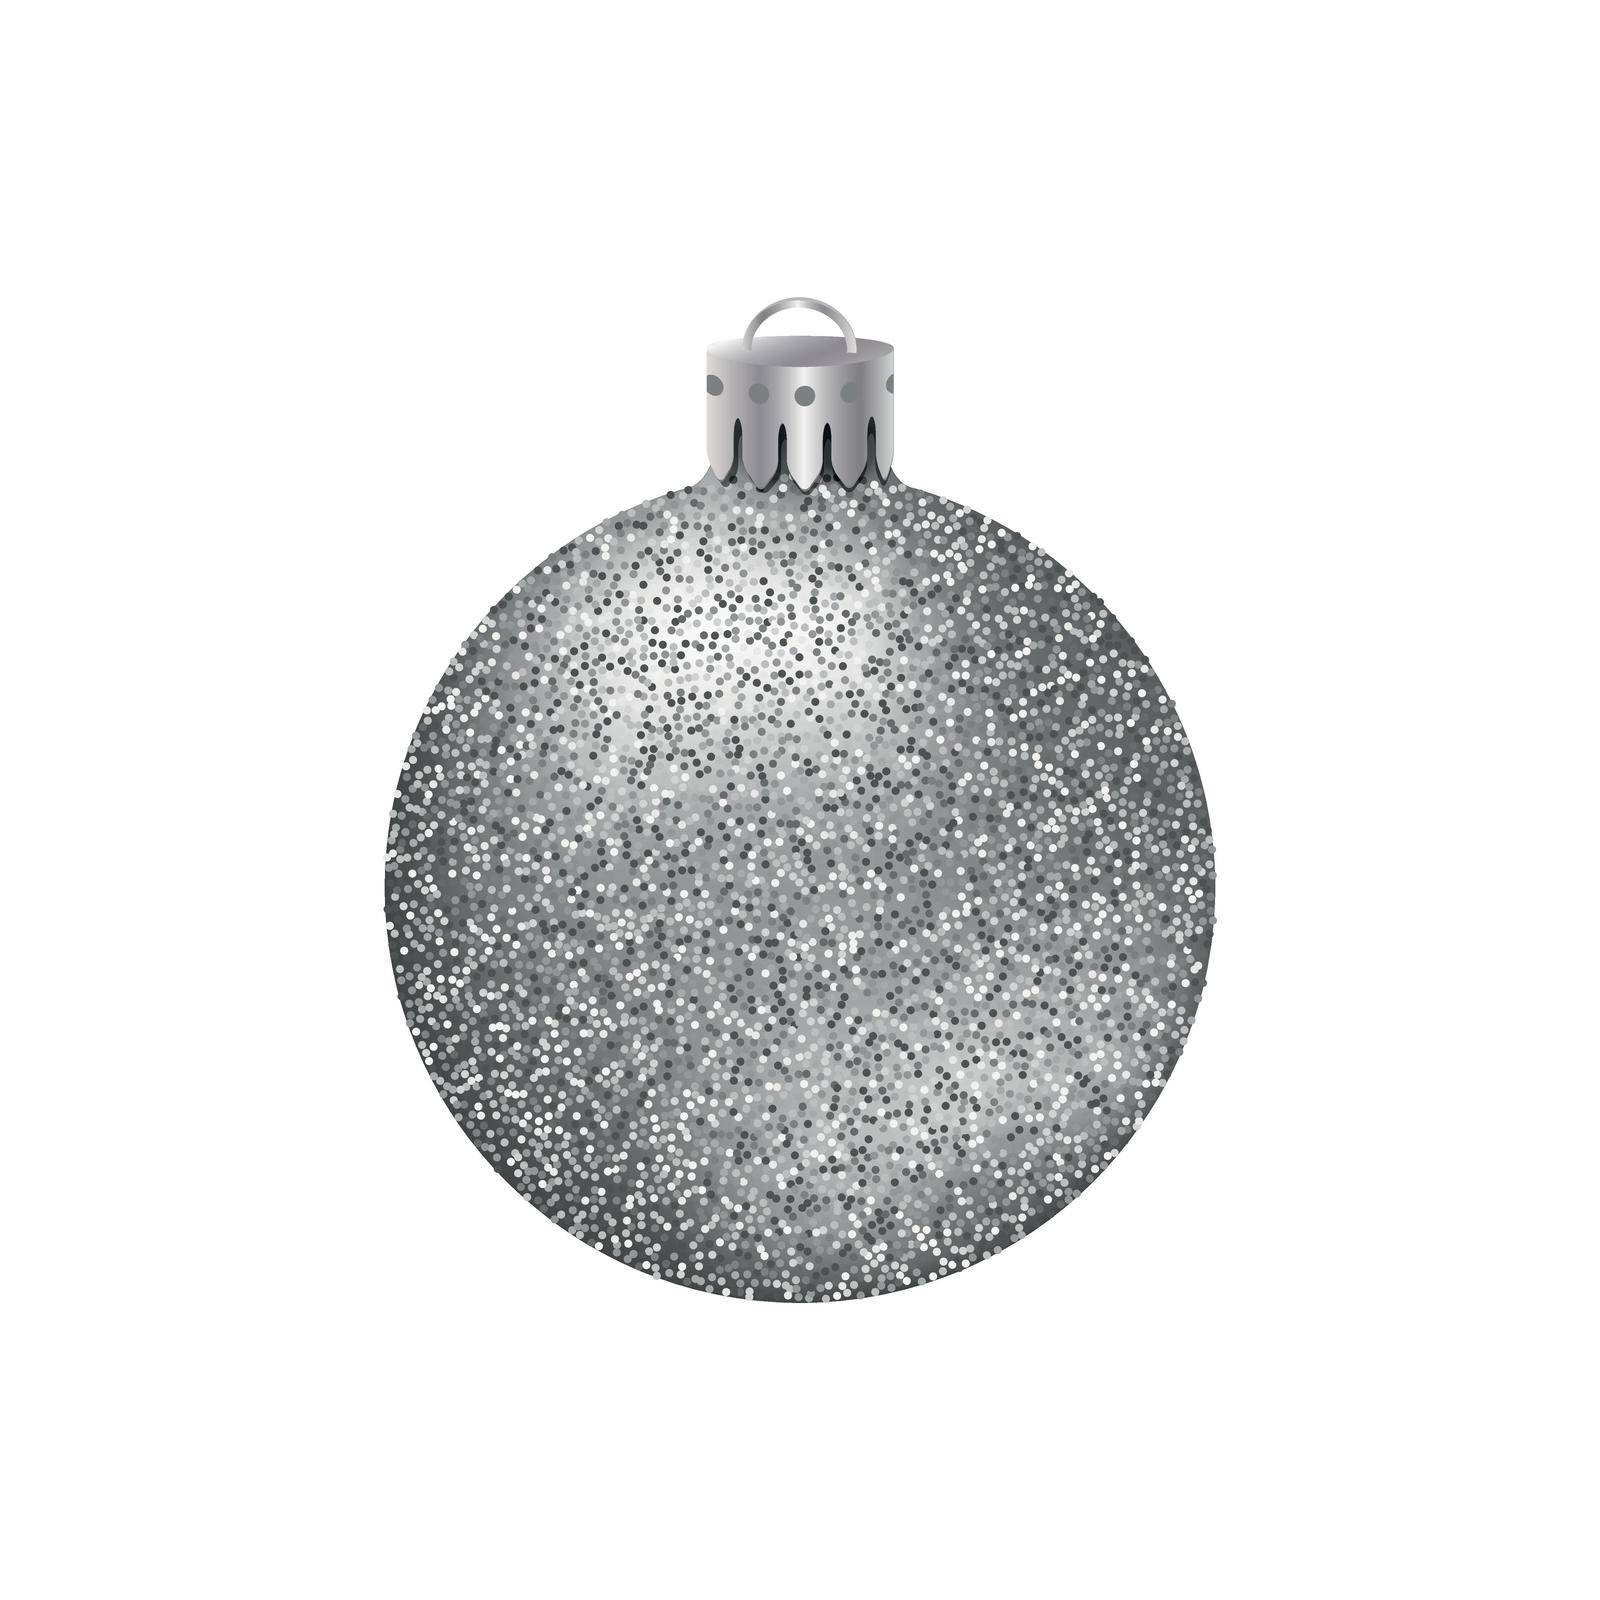 Silver Christmas ball. by Minur